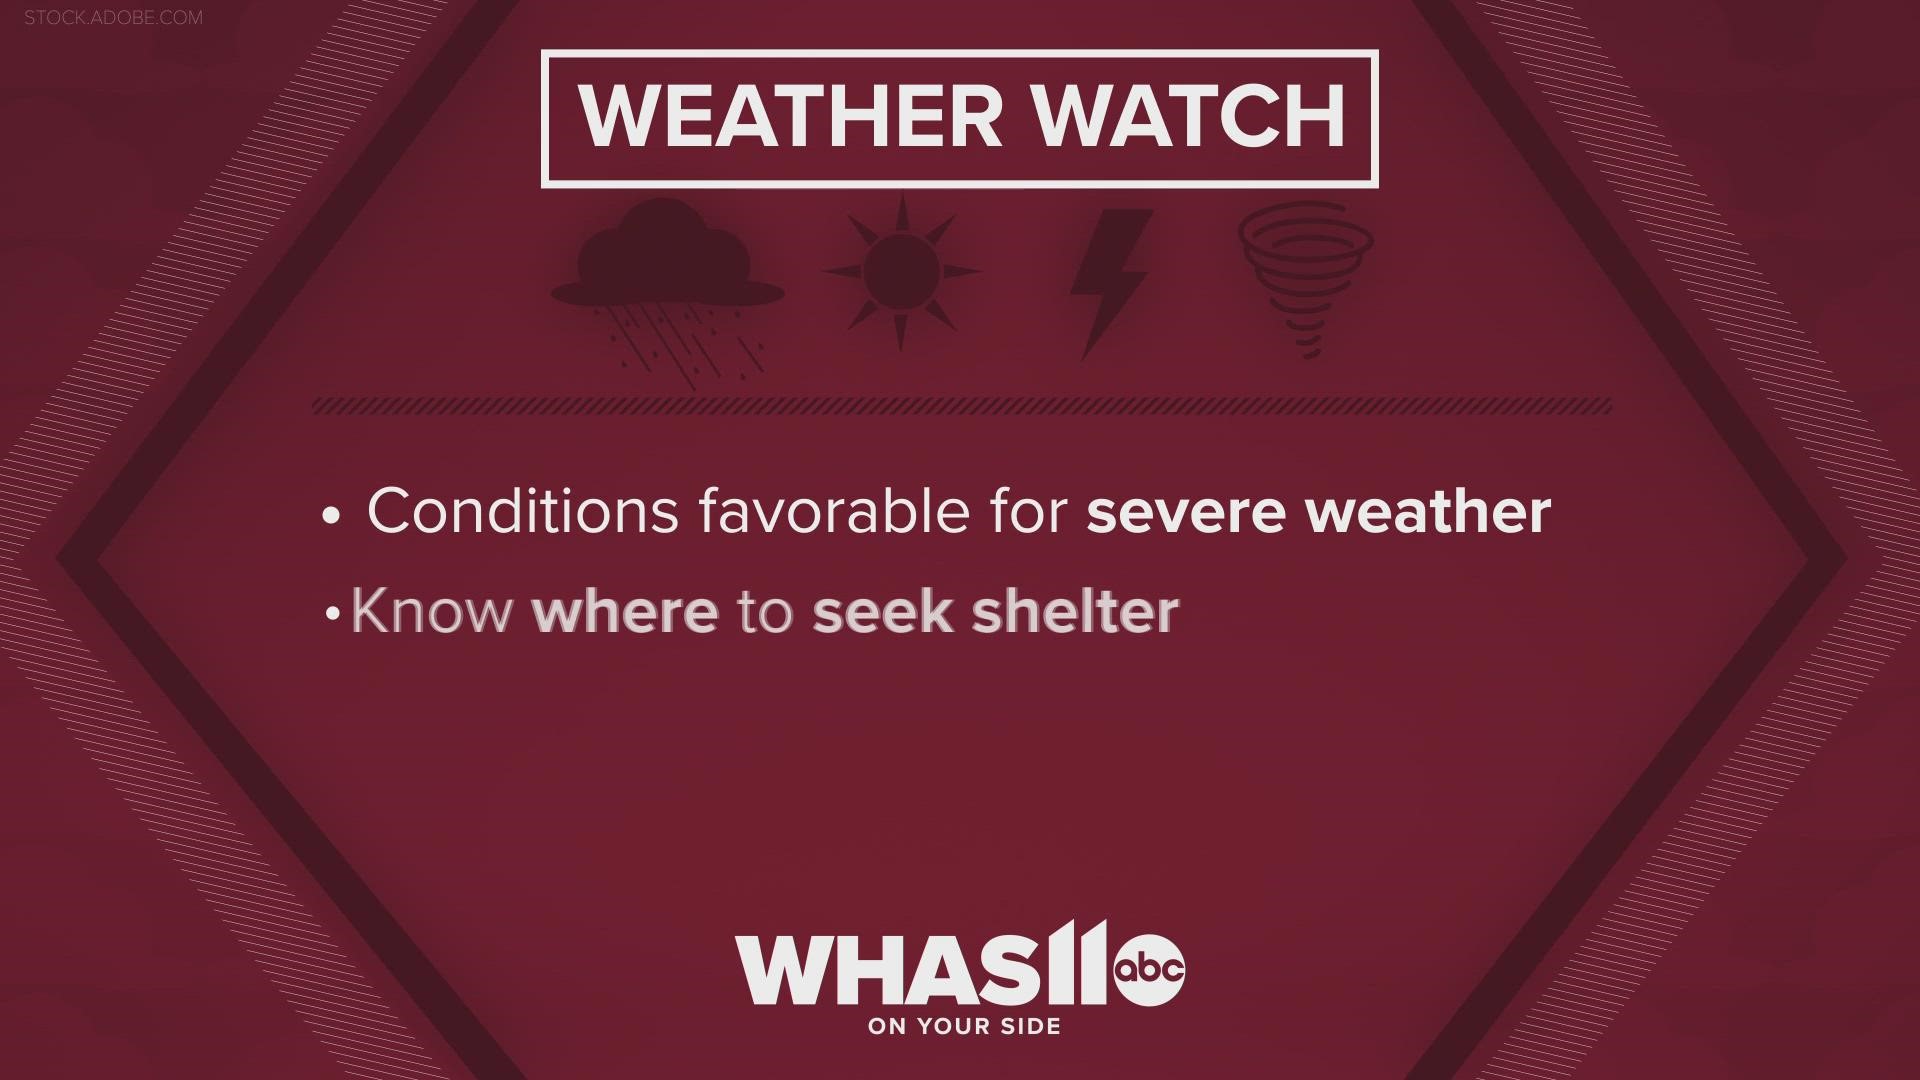 Here is how to react to a weather watch and a weather warning.